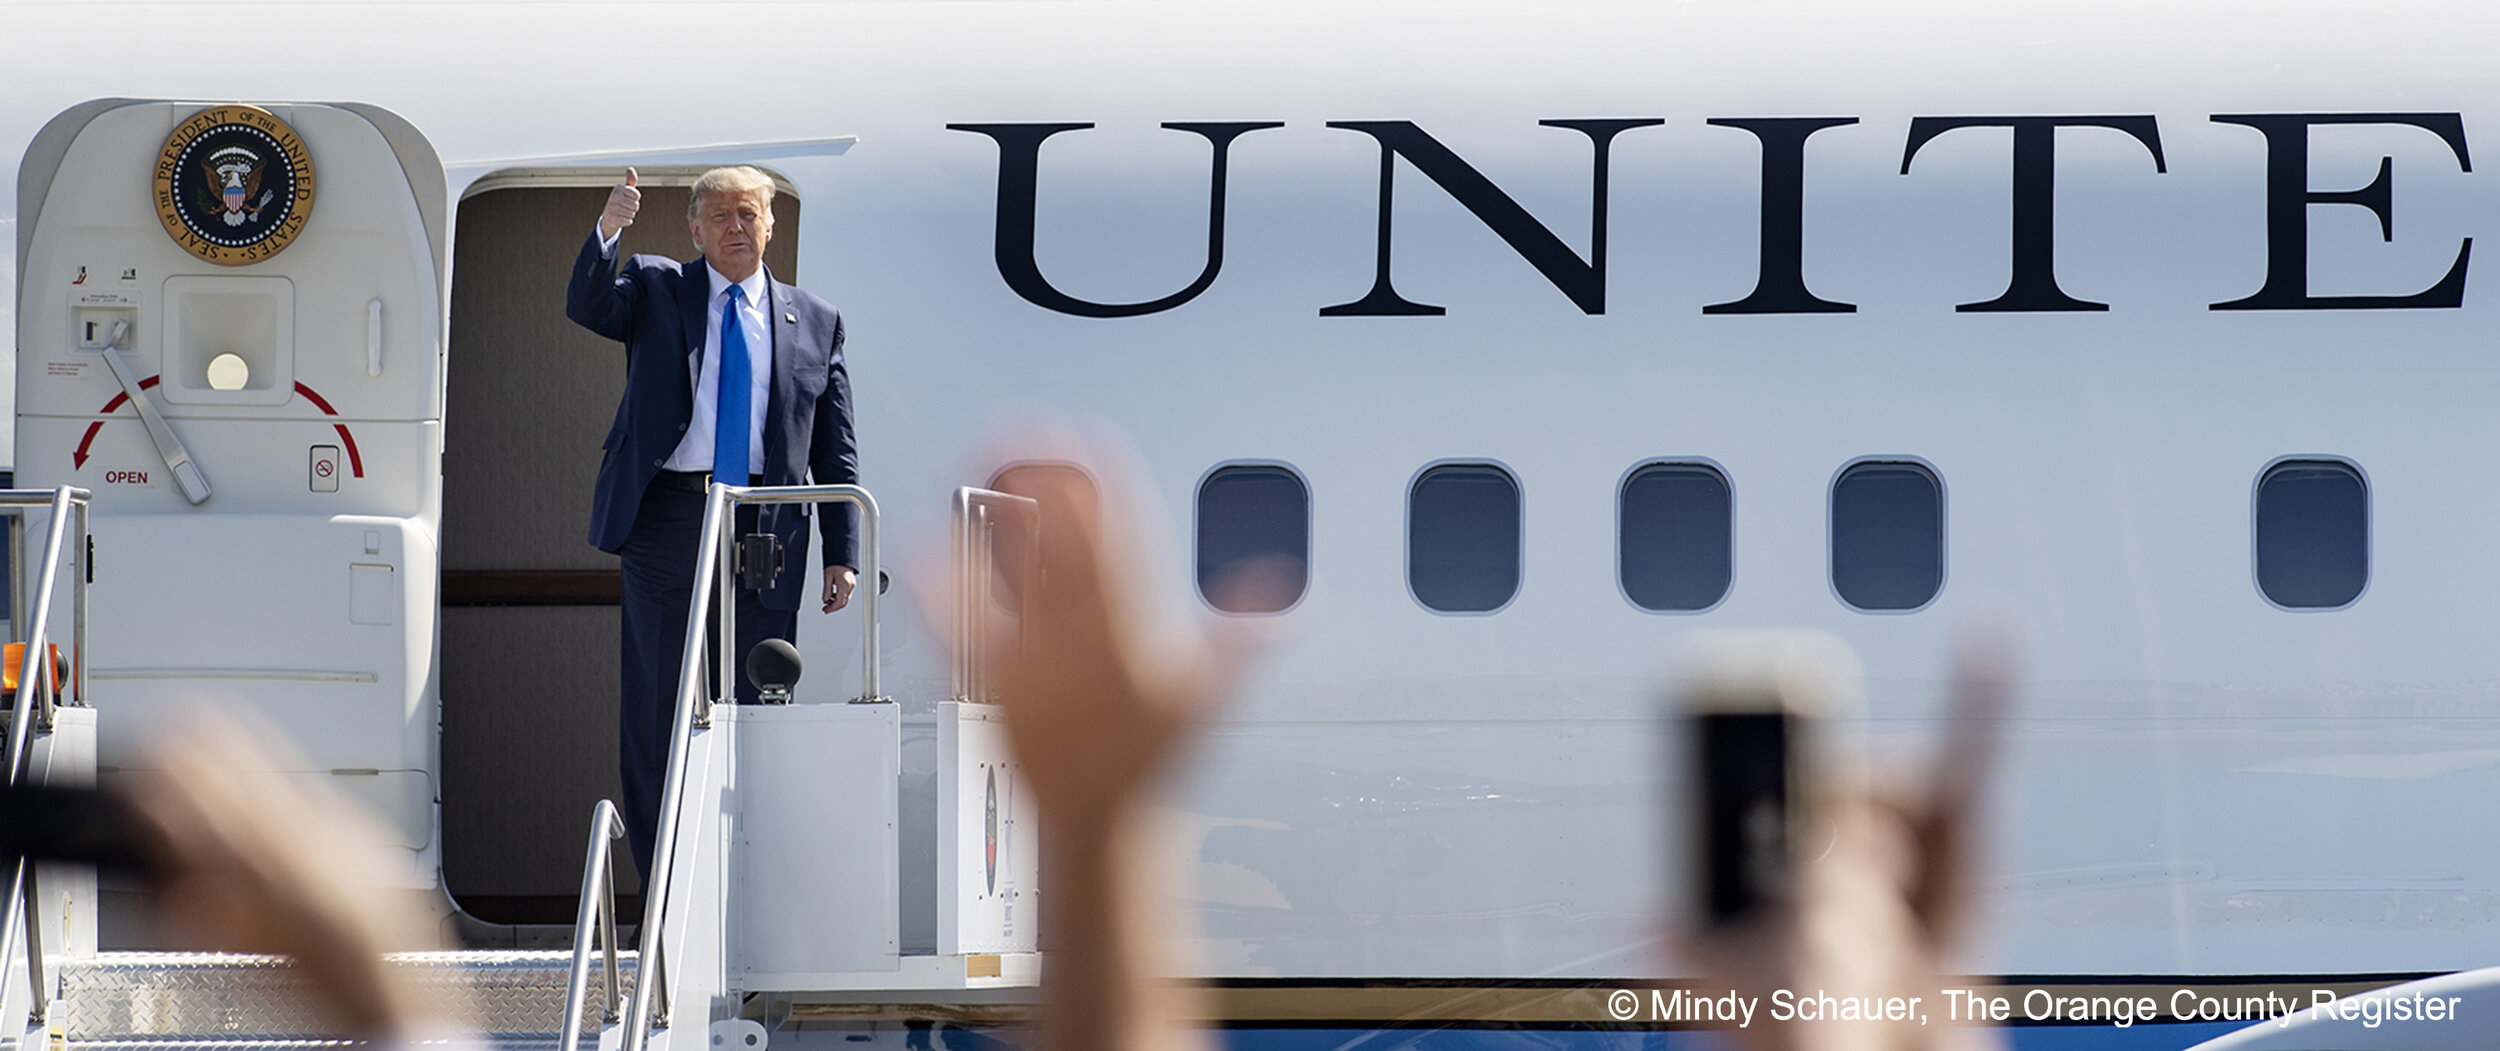  President Trump emerges from Air Force One after landing at John Wayne Airport in Santa Ana on Sunday, October 18, 2020.  